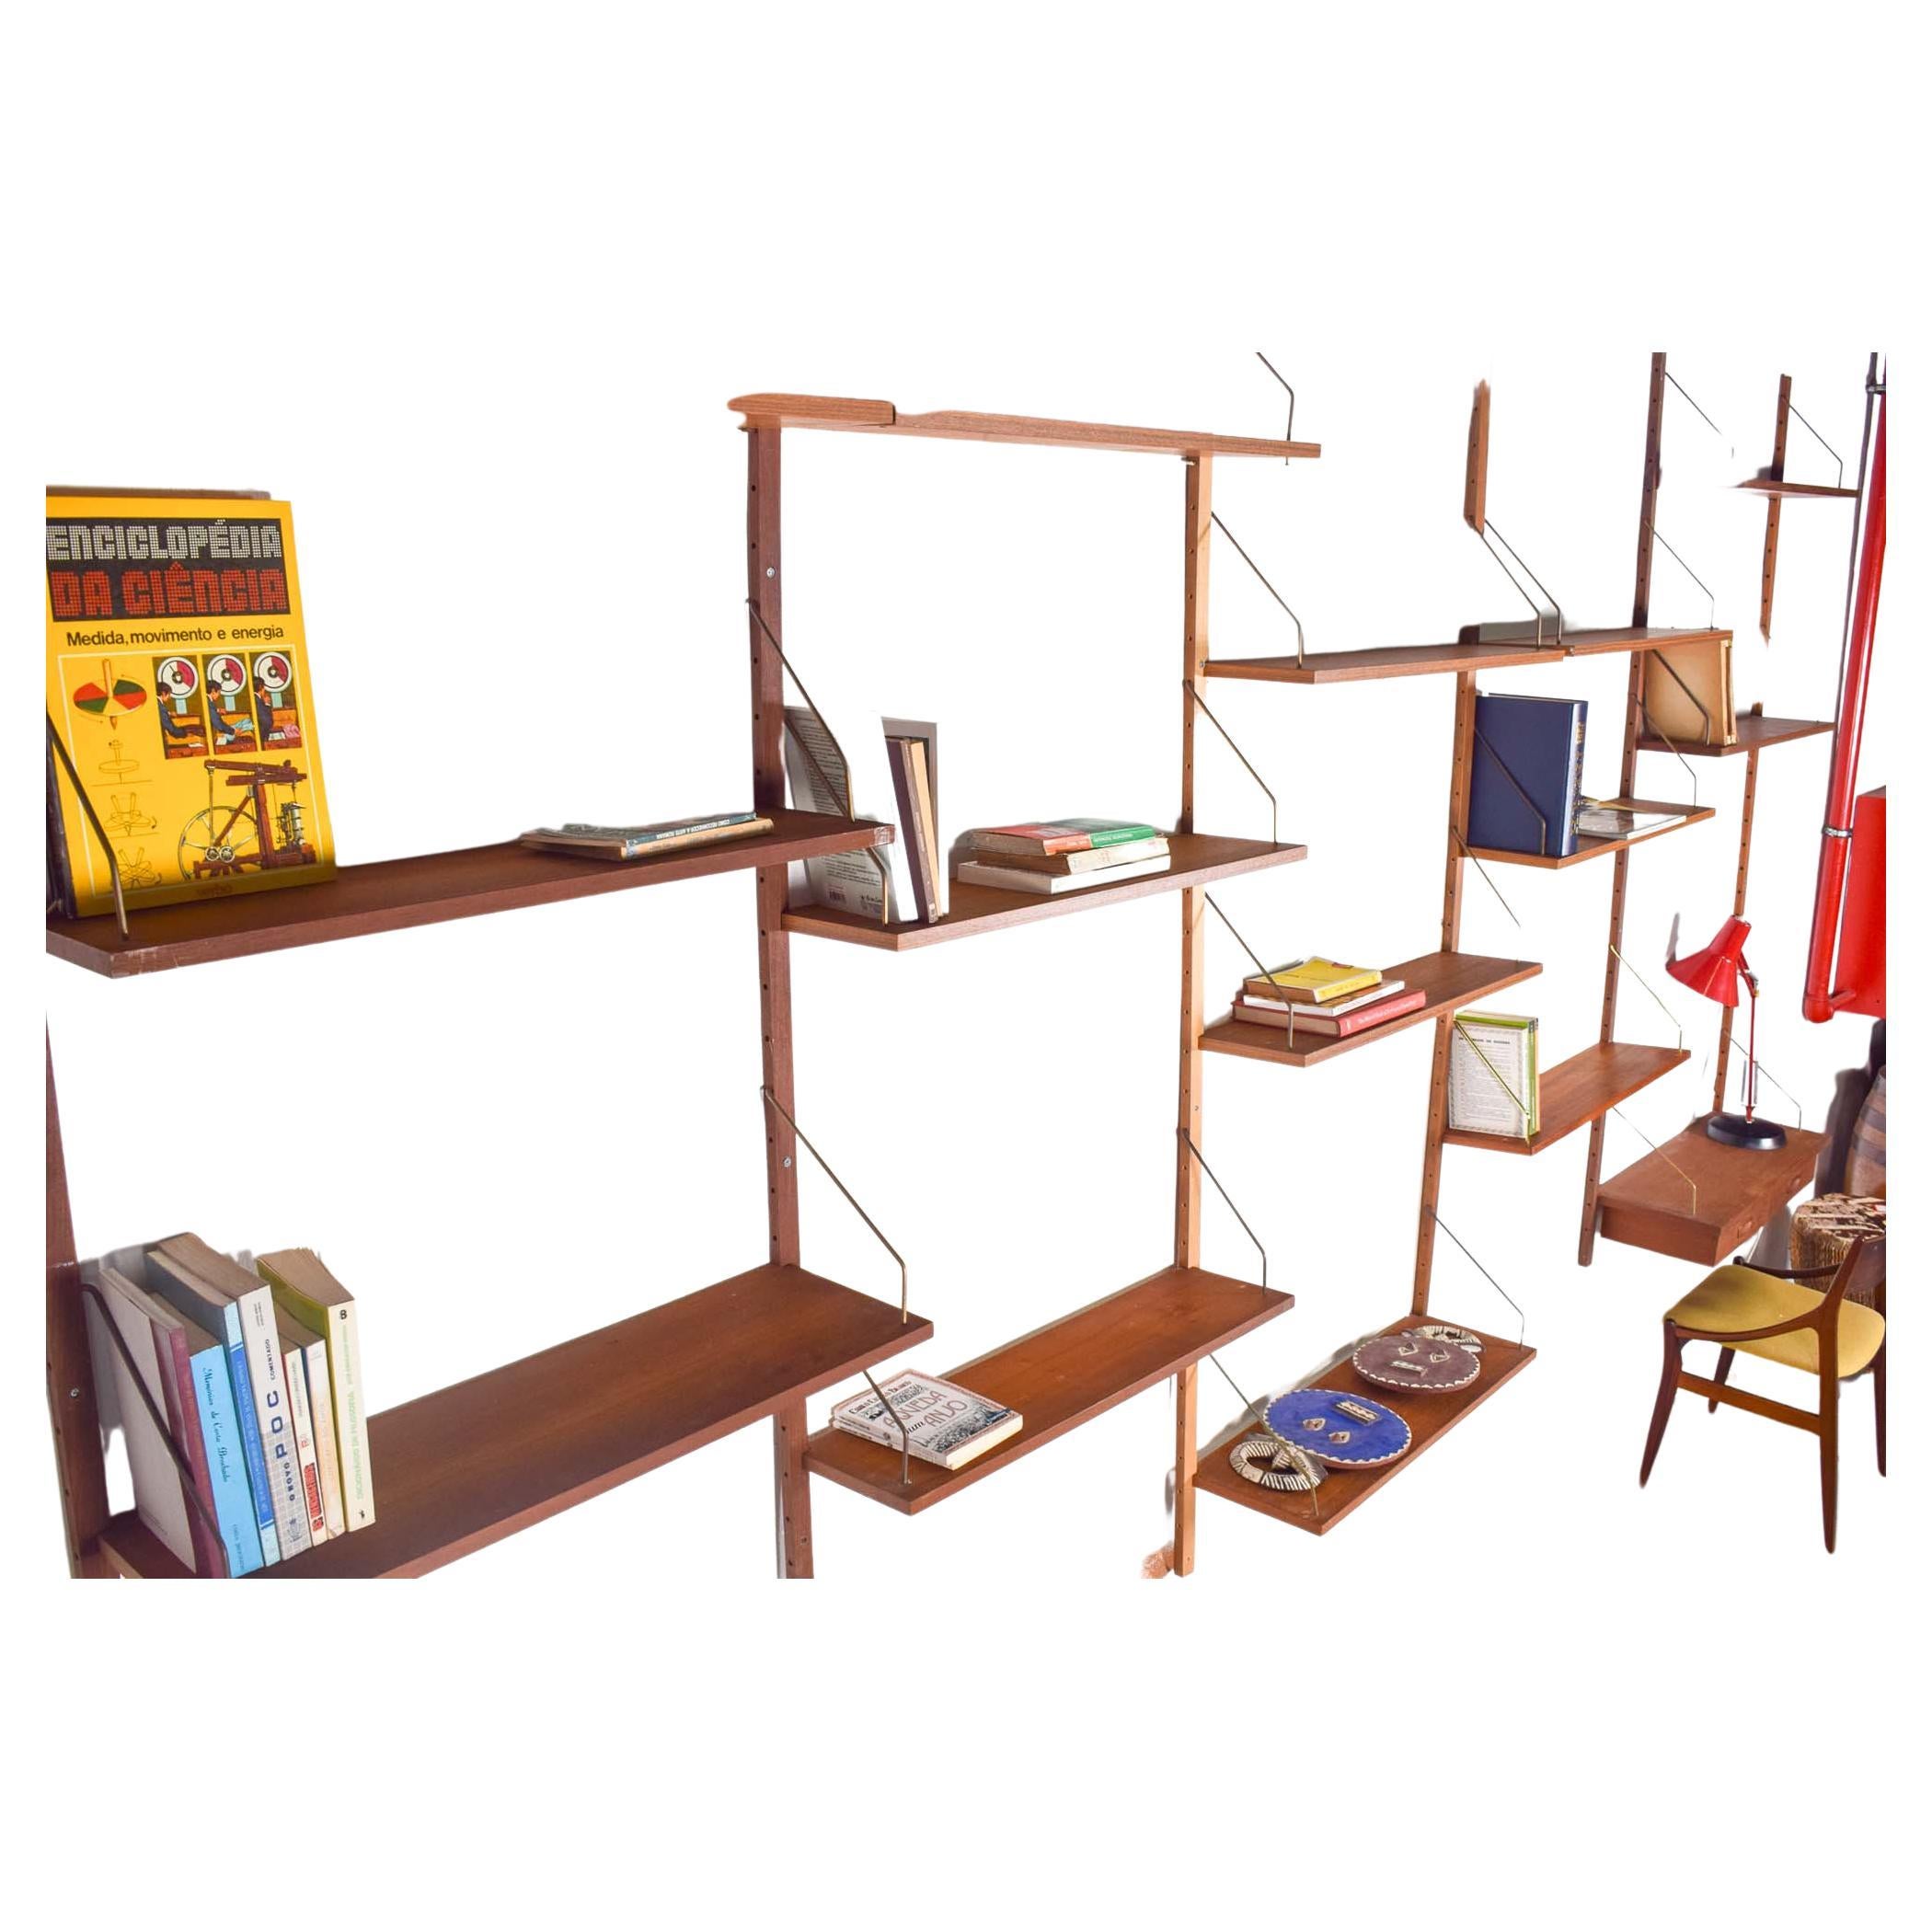 Danish teak wall unit designed by Kai Kristiansen for Feldballes Mobelfabrik, in the 60s. A teak wall unit system. Composed with several modules, 14 shelves and a desk with drawers which can be moved and arranged in different ways and be adjusted as